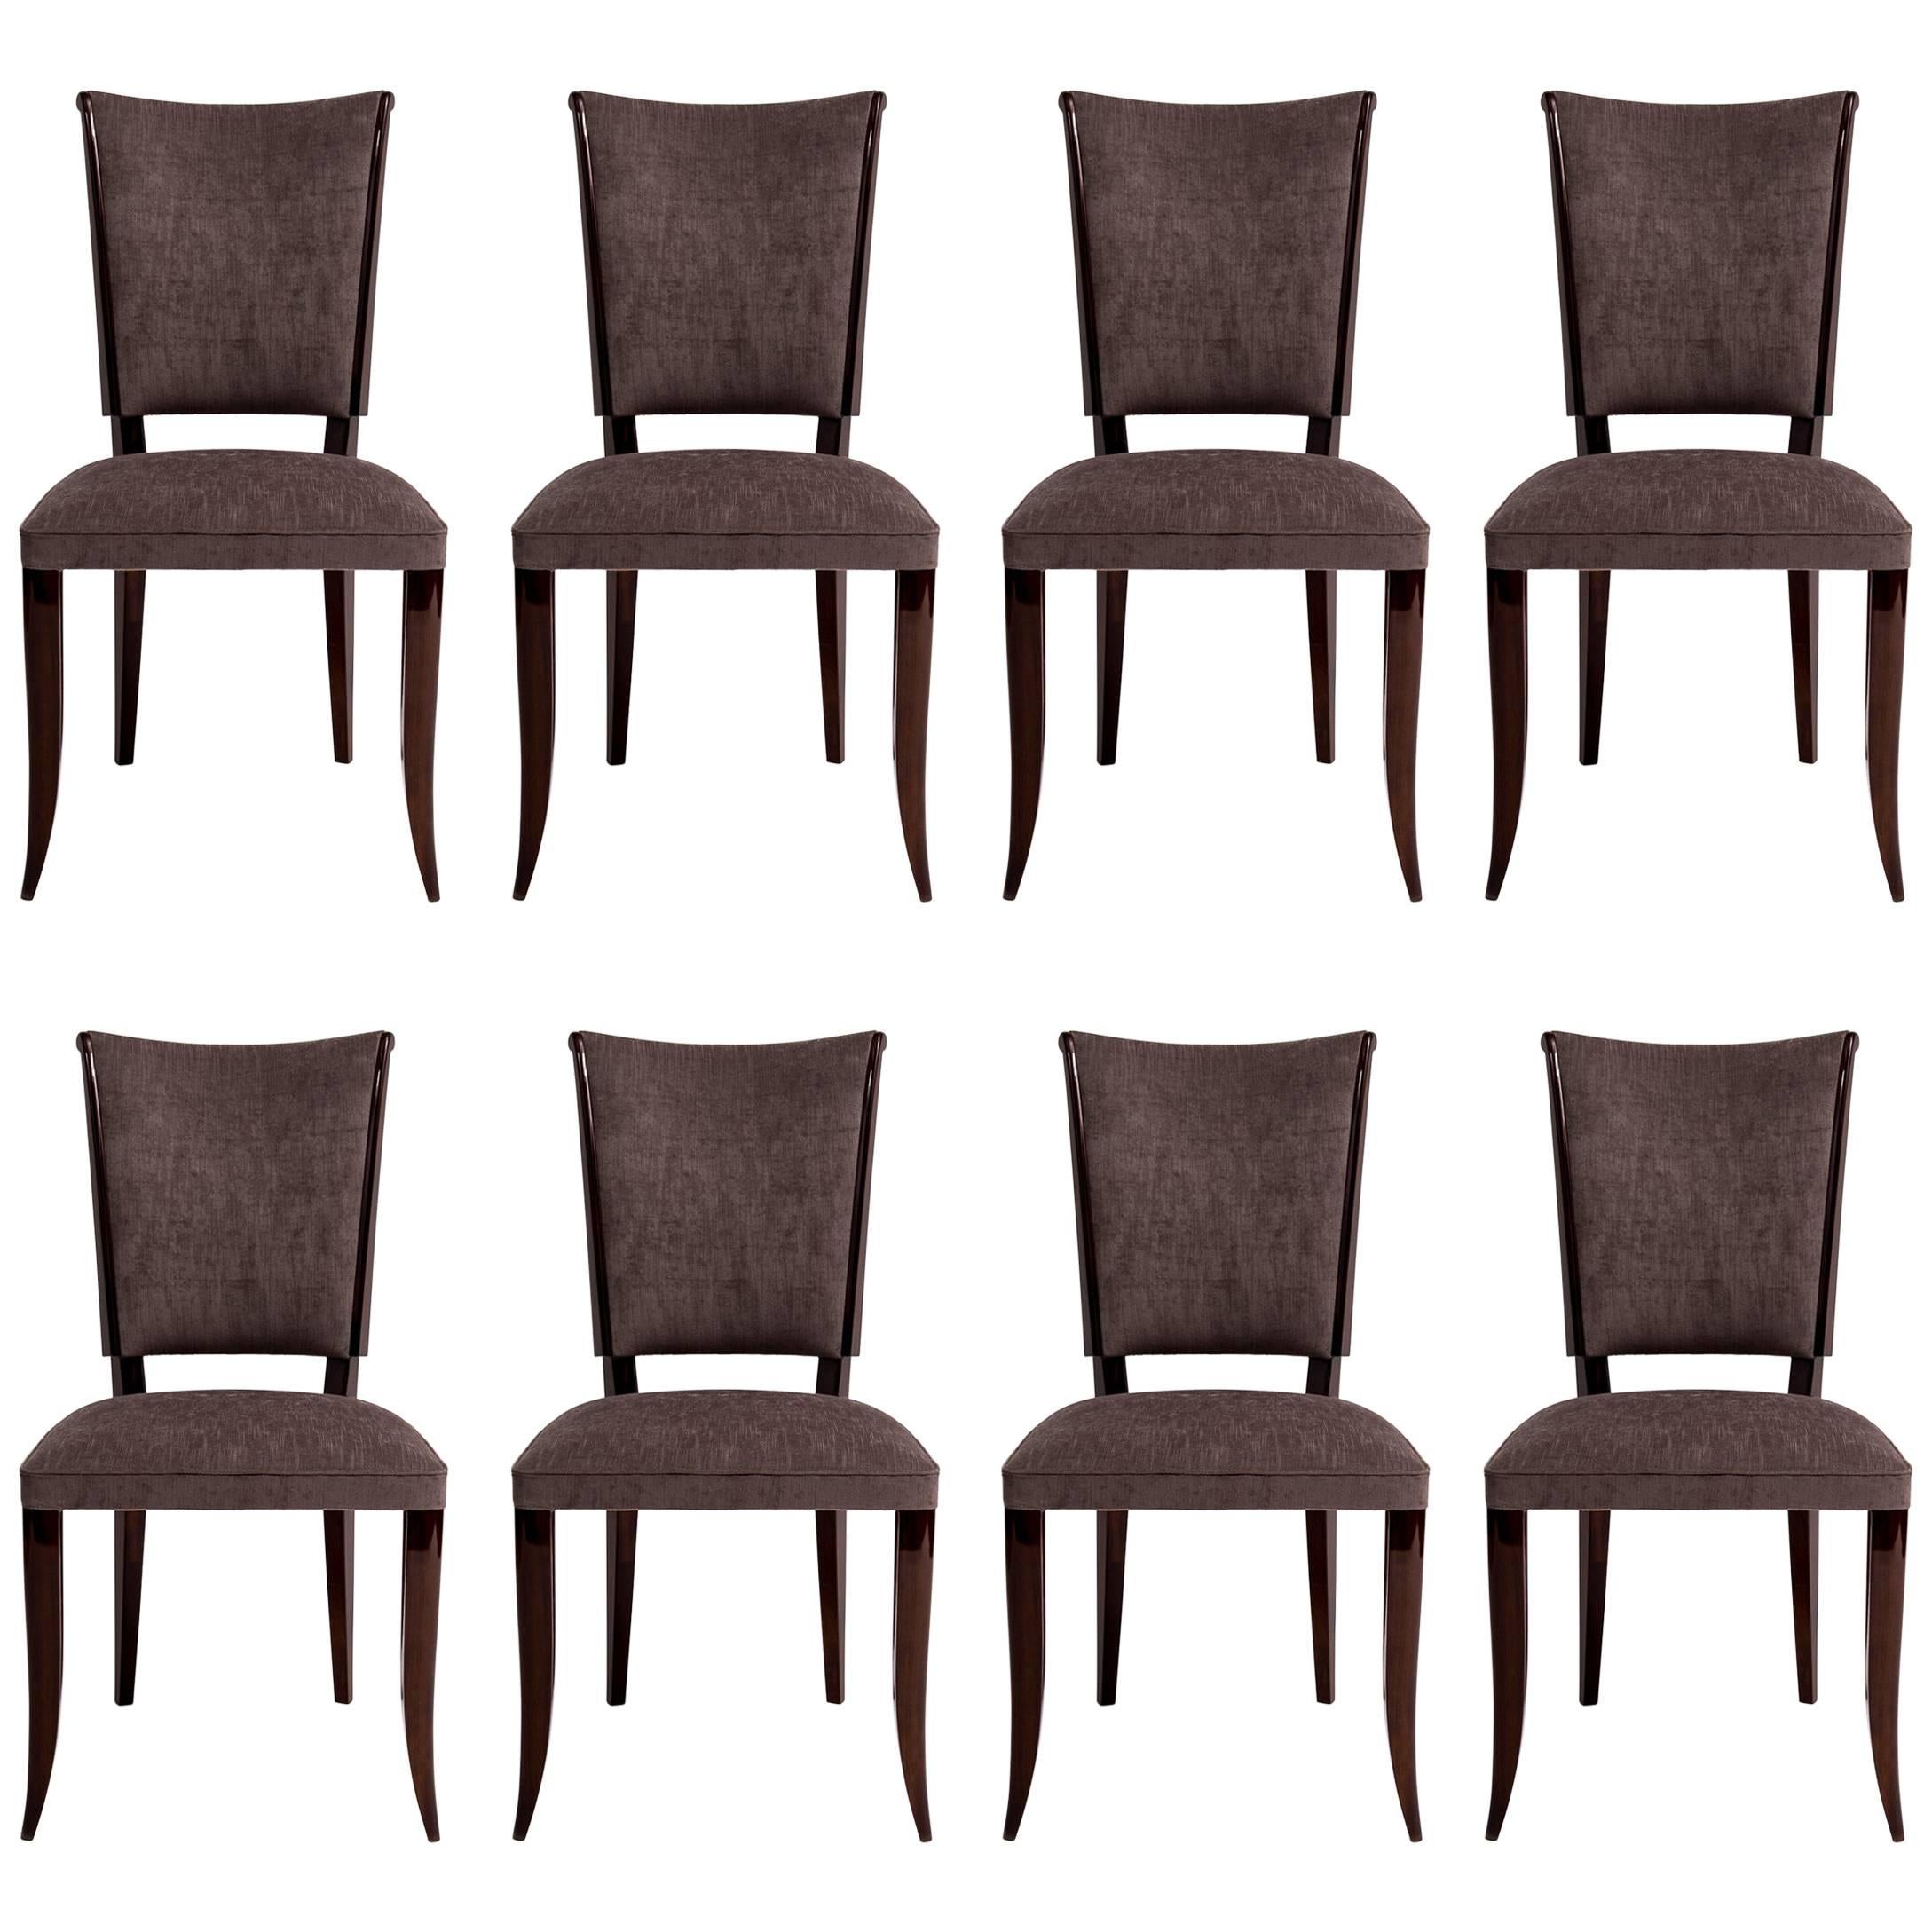 Suite of Eight French Art Deco Dining Chairs, circa 1940s